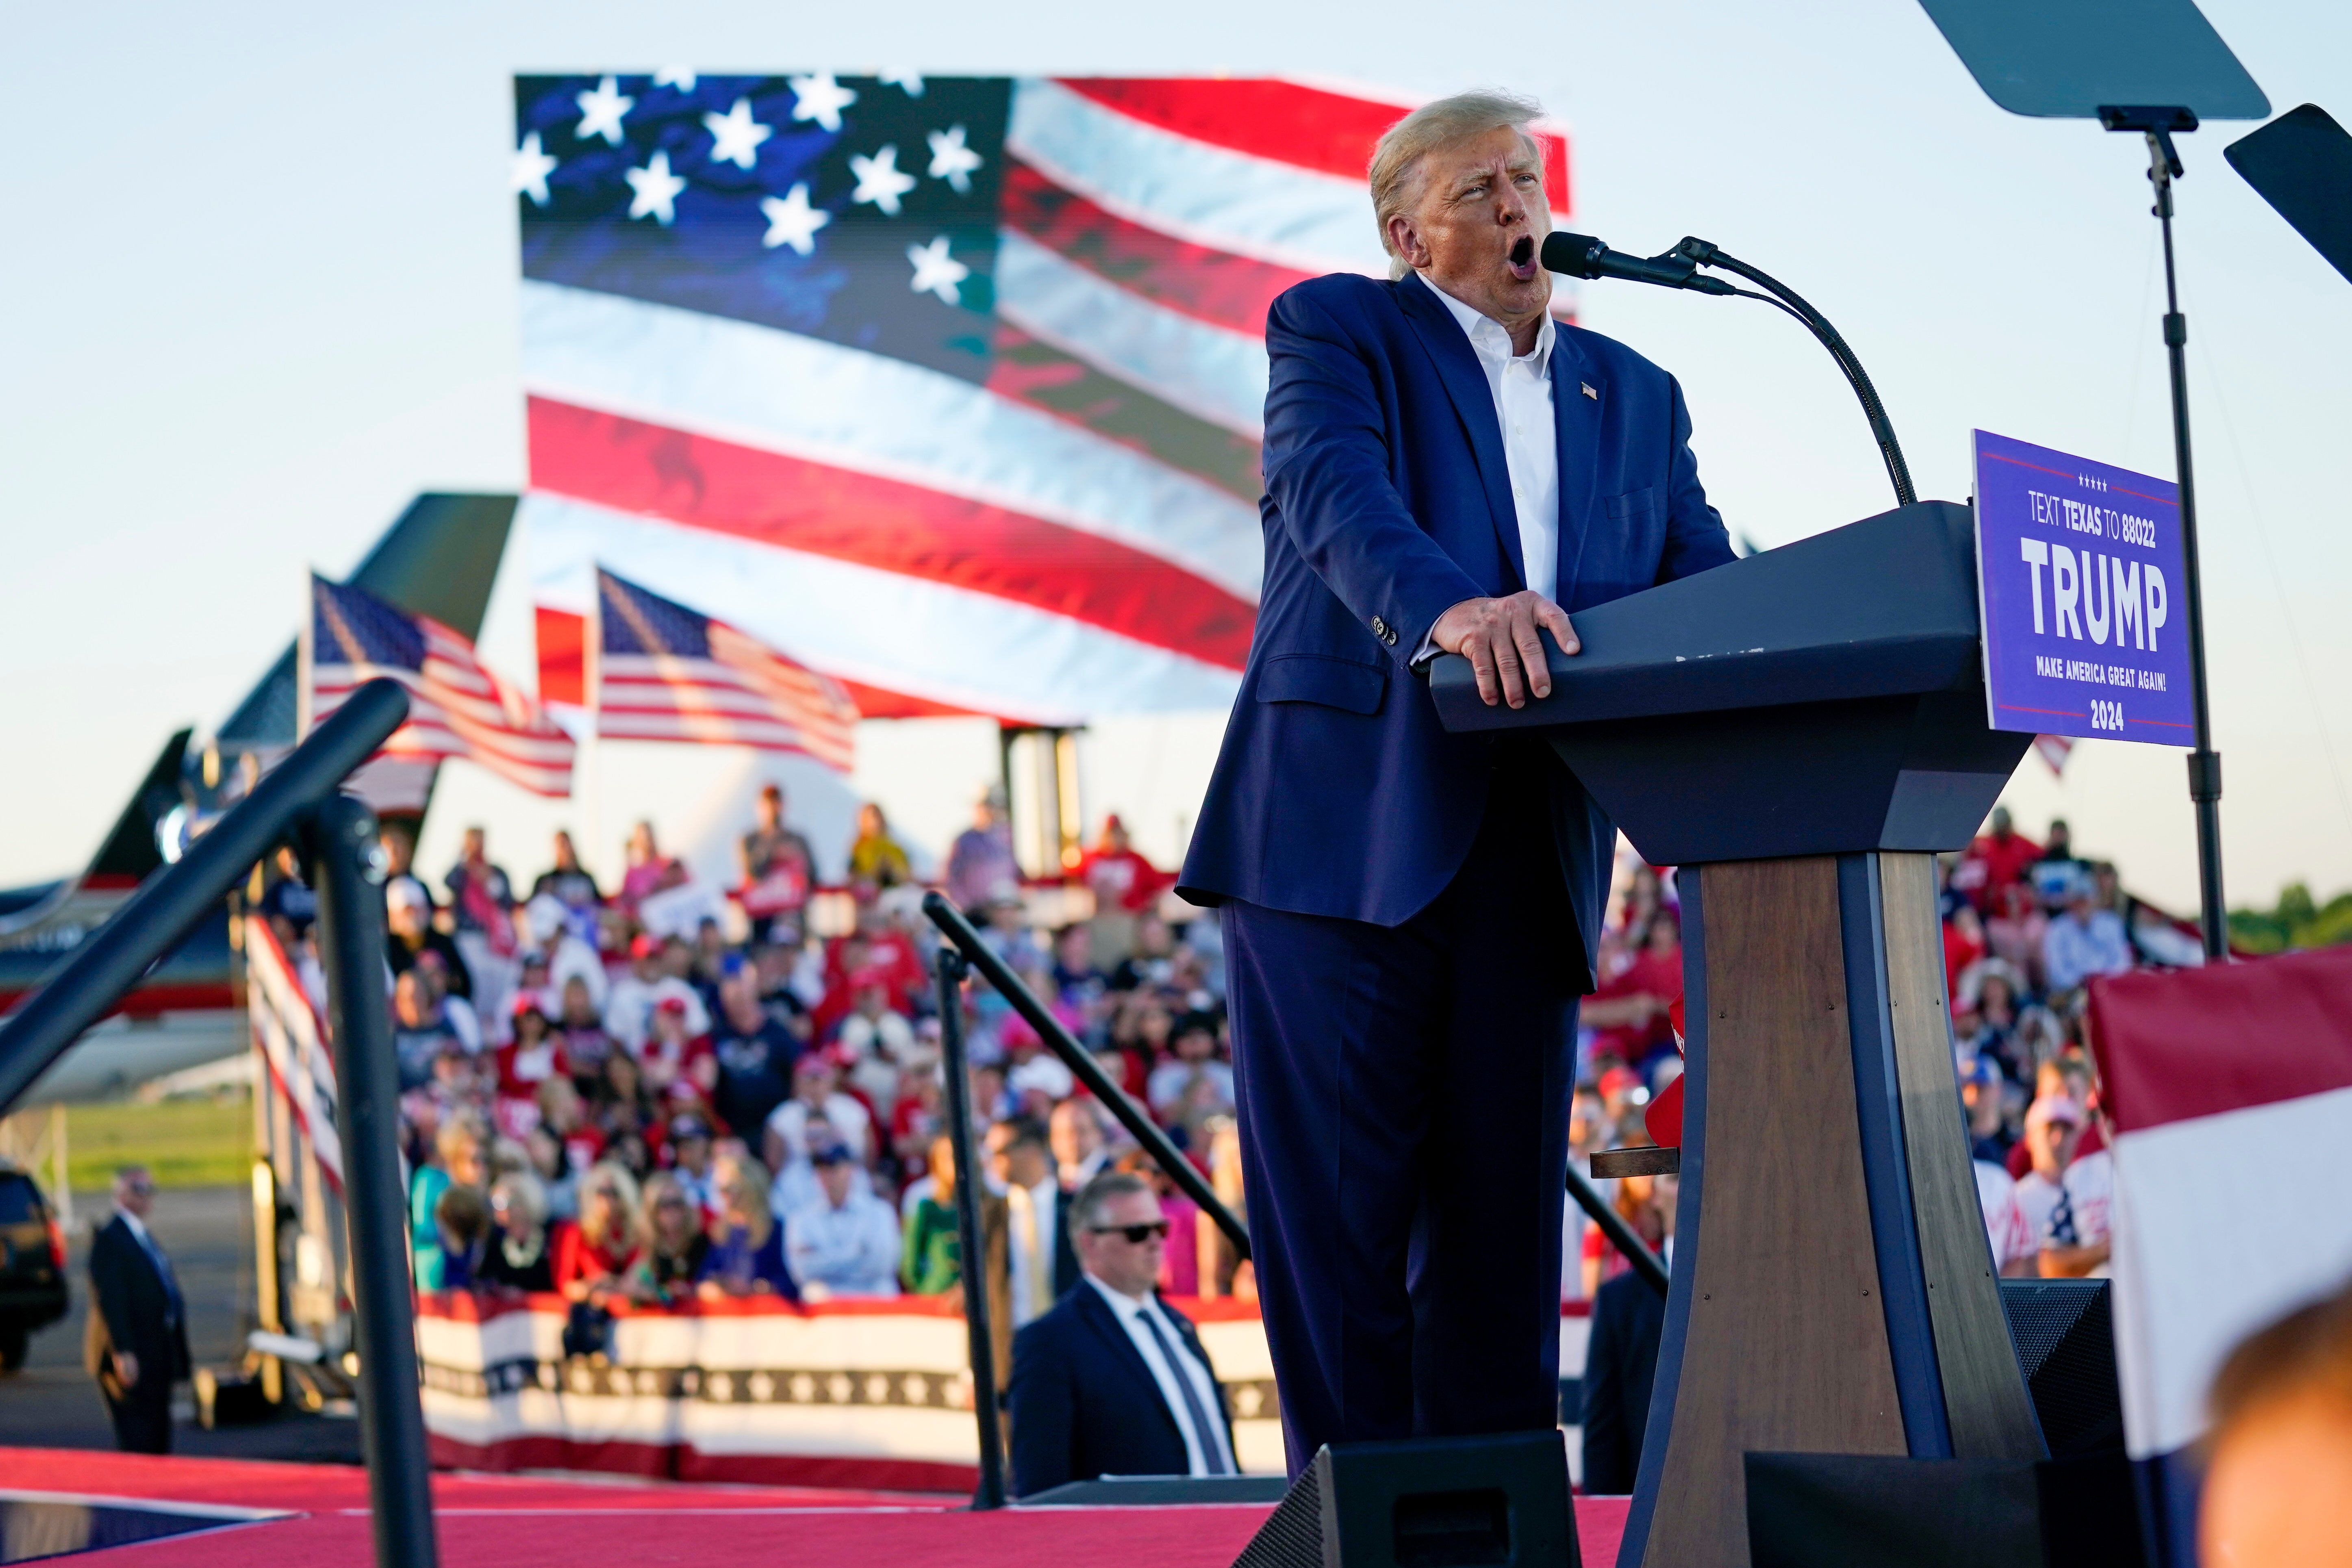 Donald Trump speaks at a rally in Waco, Texas.